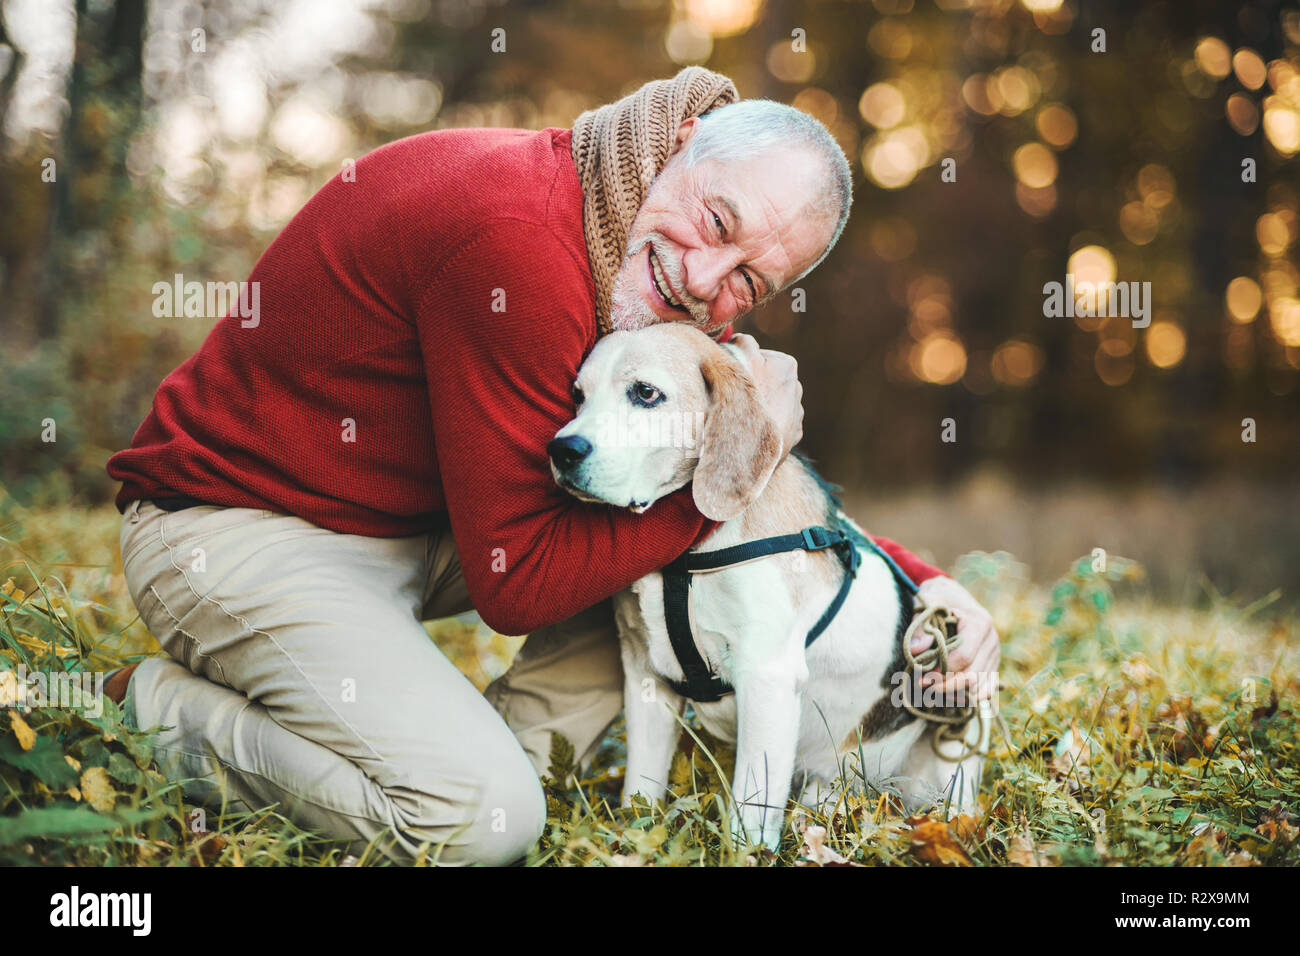 A senior man with a dog in an autumn nature at sunset. Stock Photo